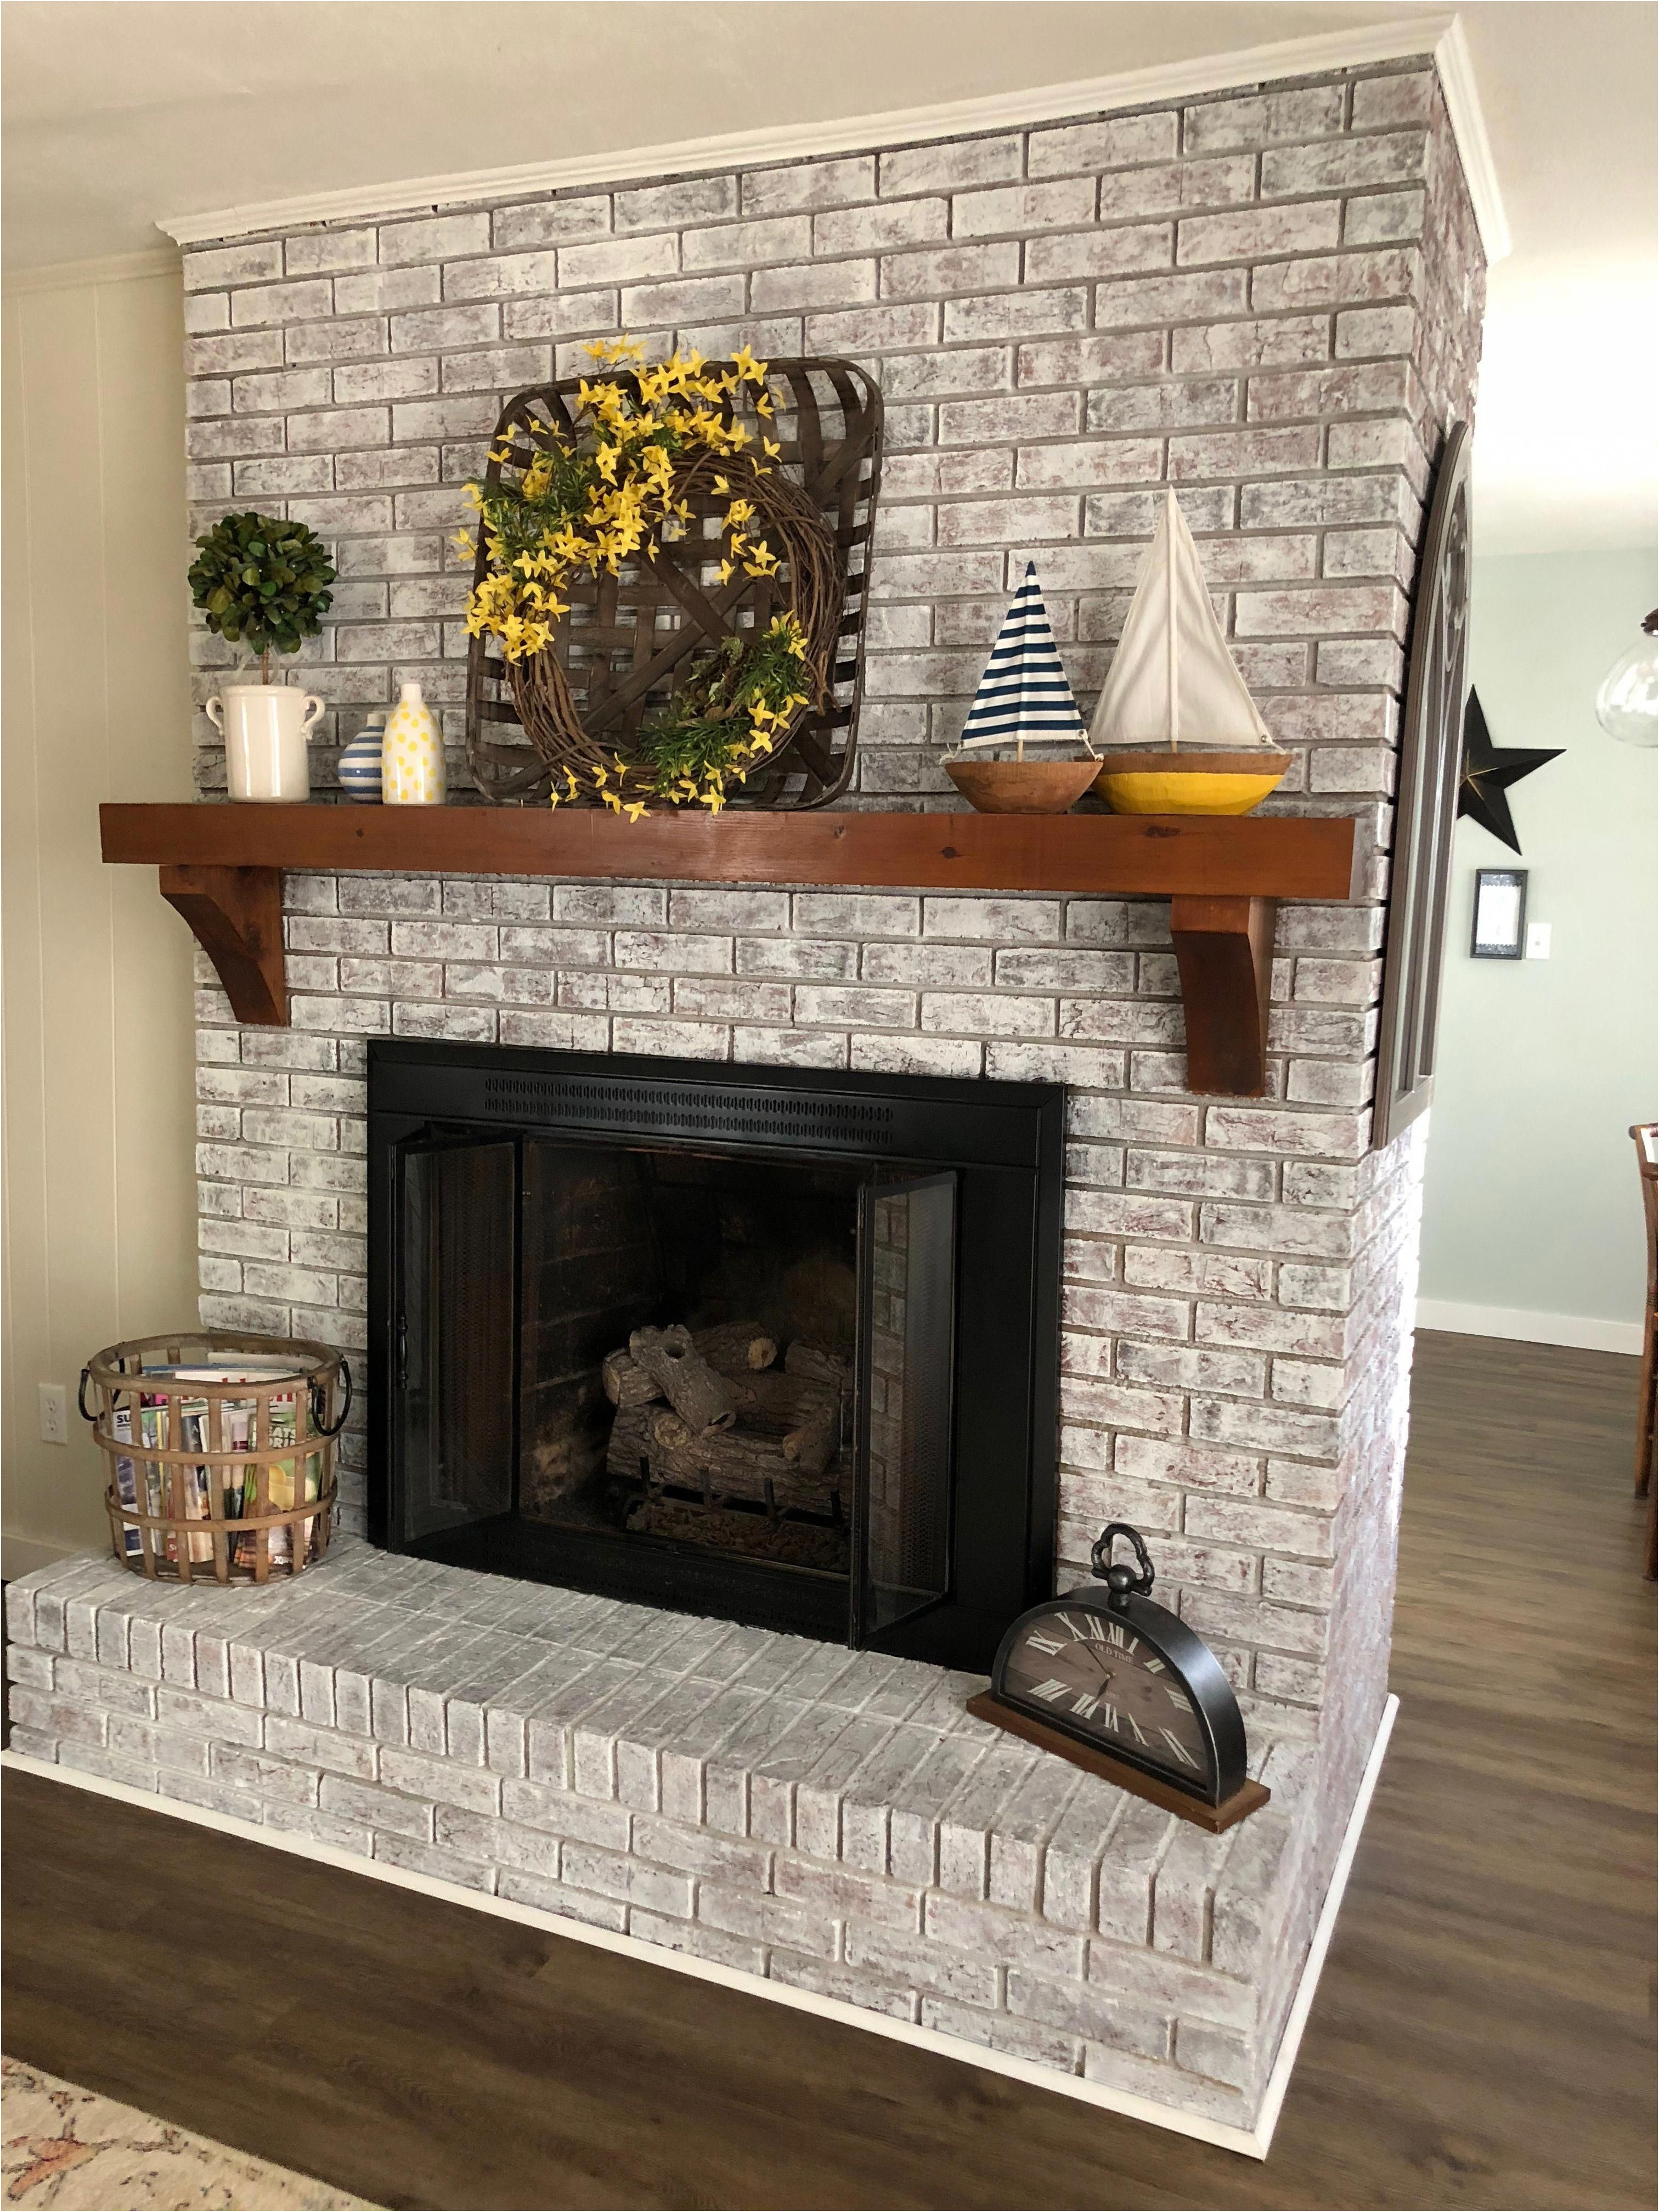 Best Of Painting Fireplace Brick Ideas